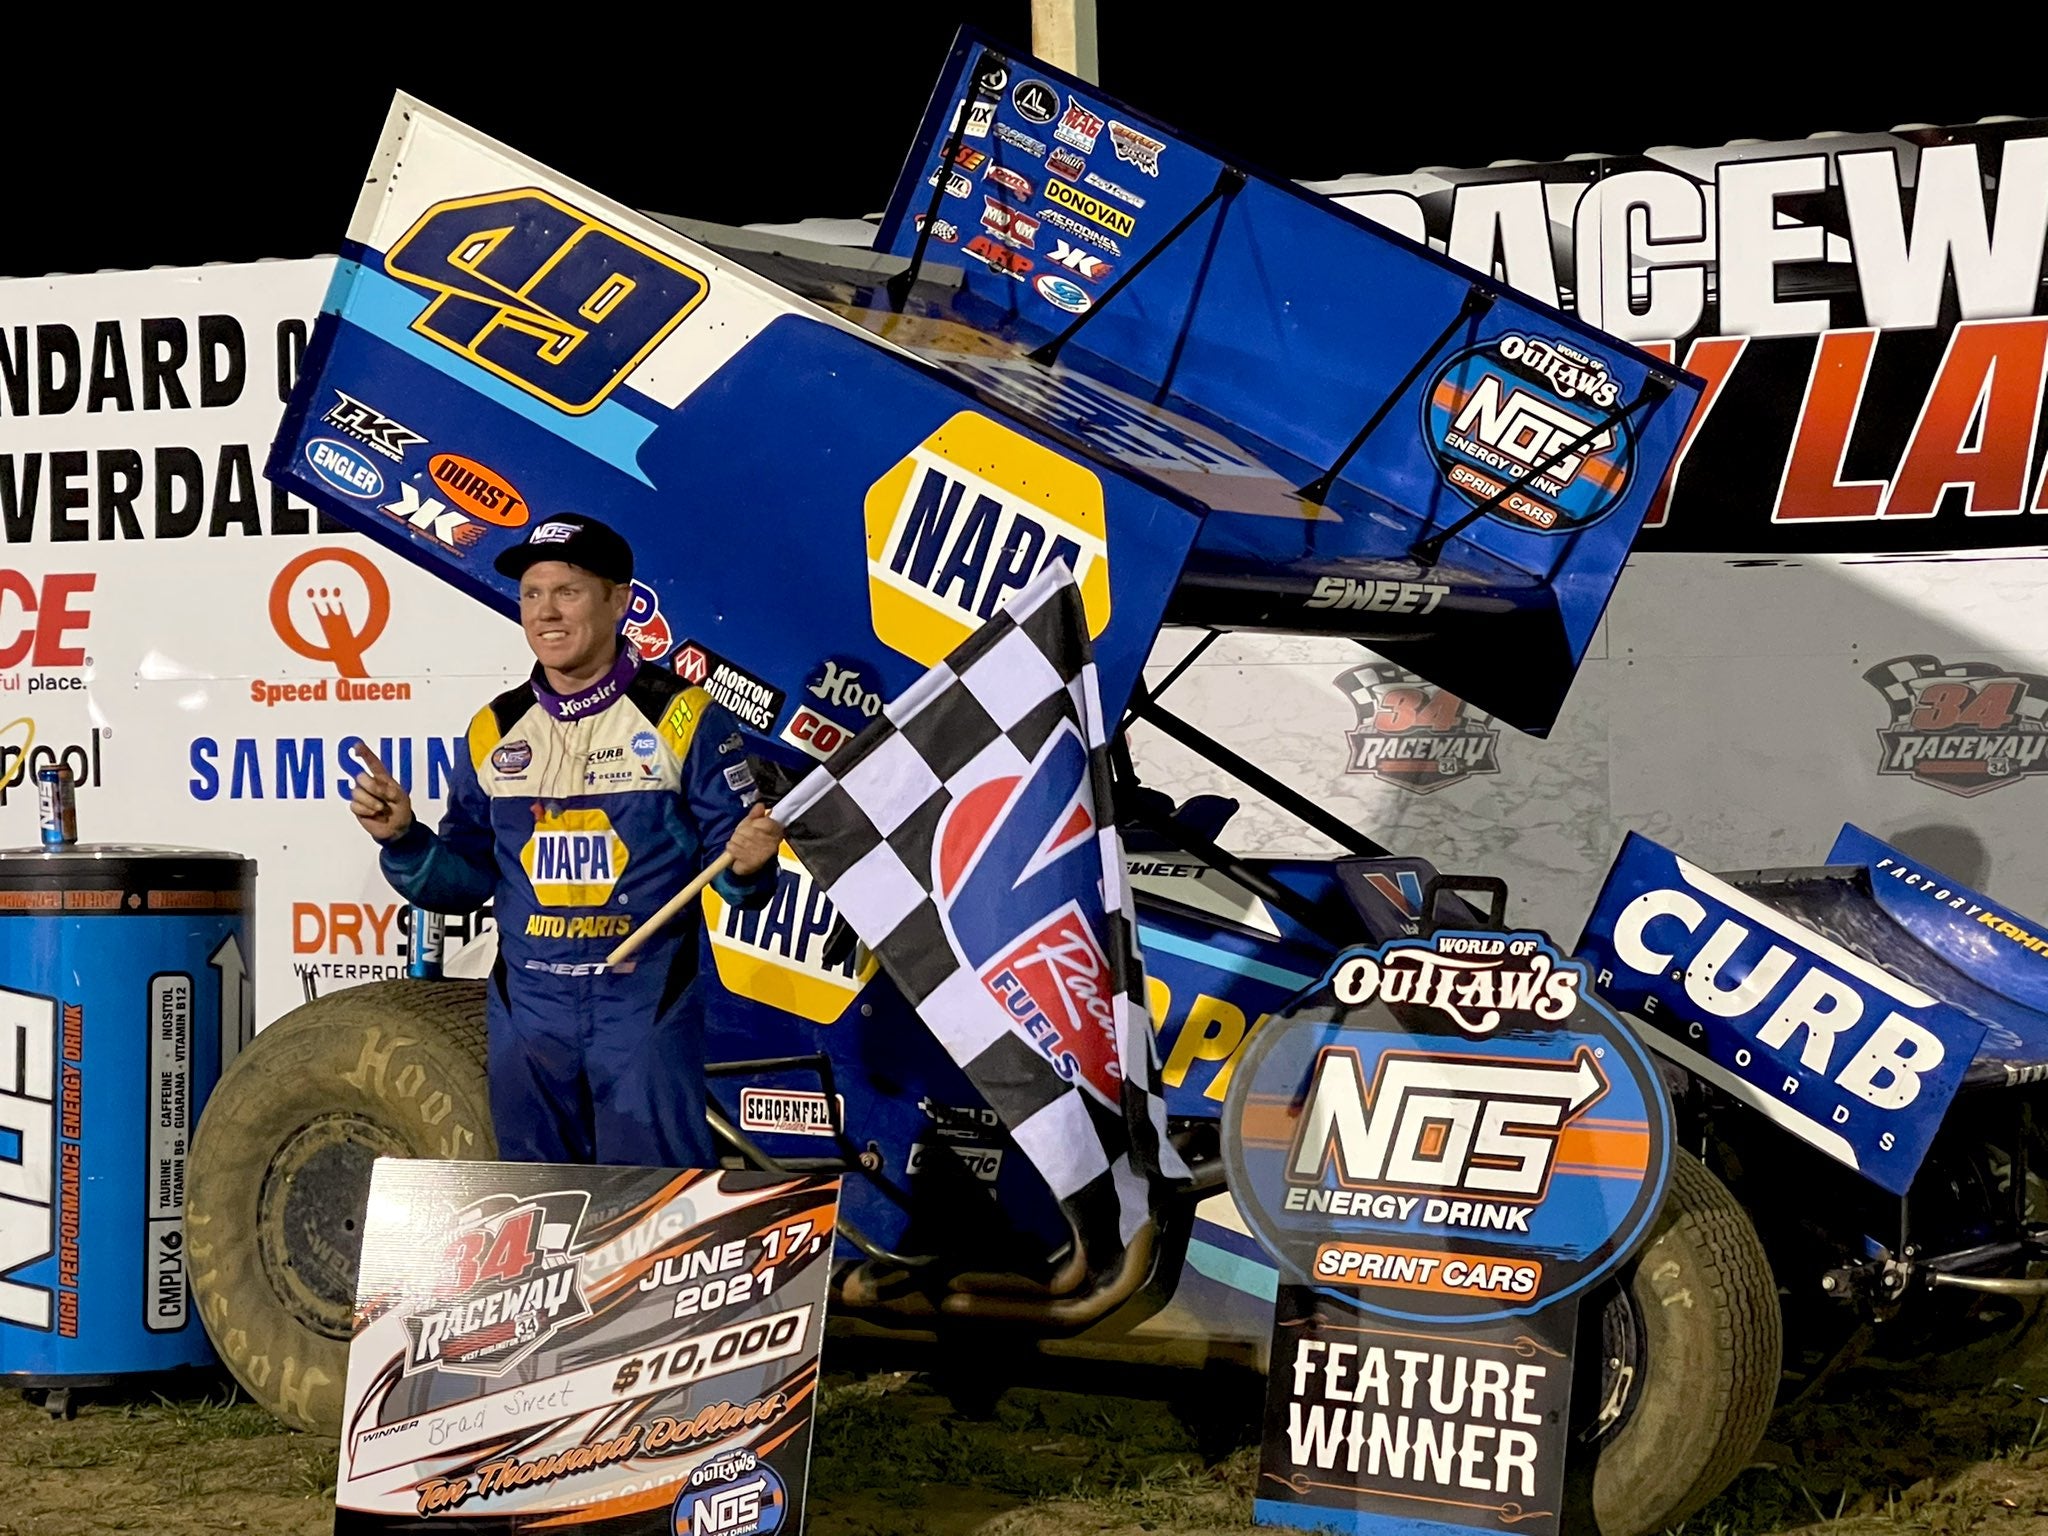 SWEET AND THE NAPA AUTO PARTS NO. 49 PICKS UP THEIR 10TH WORLD OF OUTLAW WIN OF THE SEASON